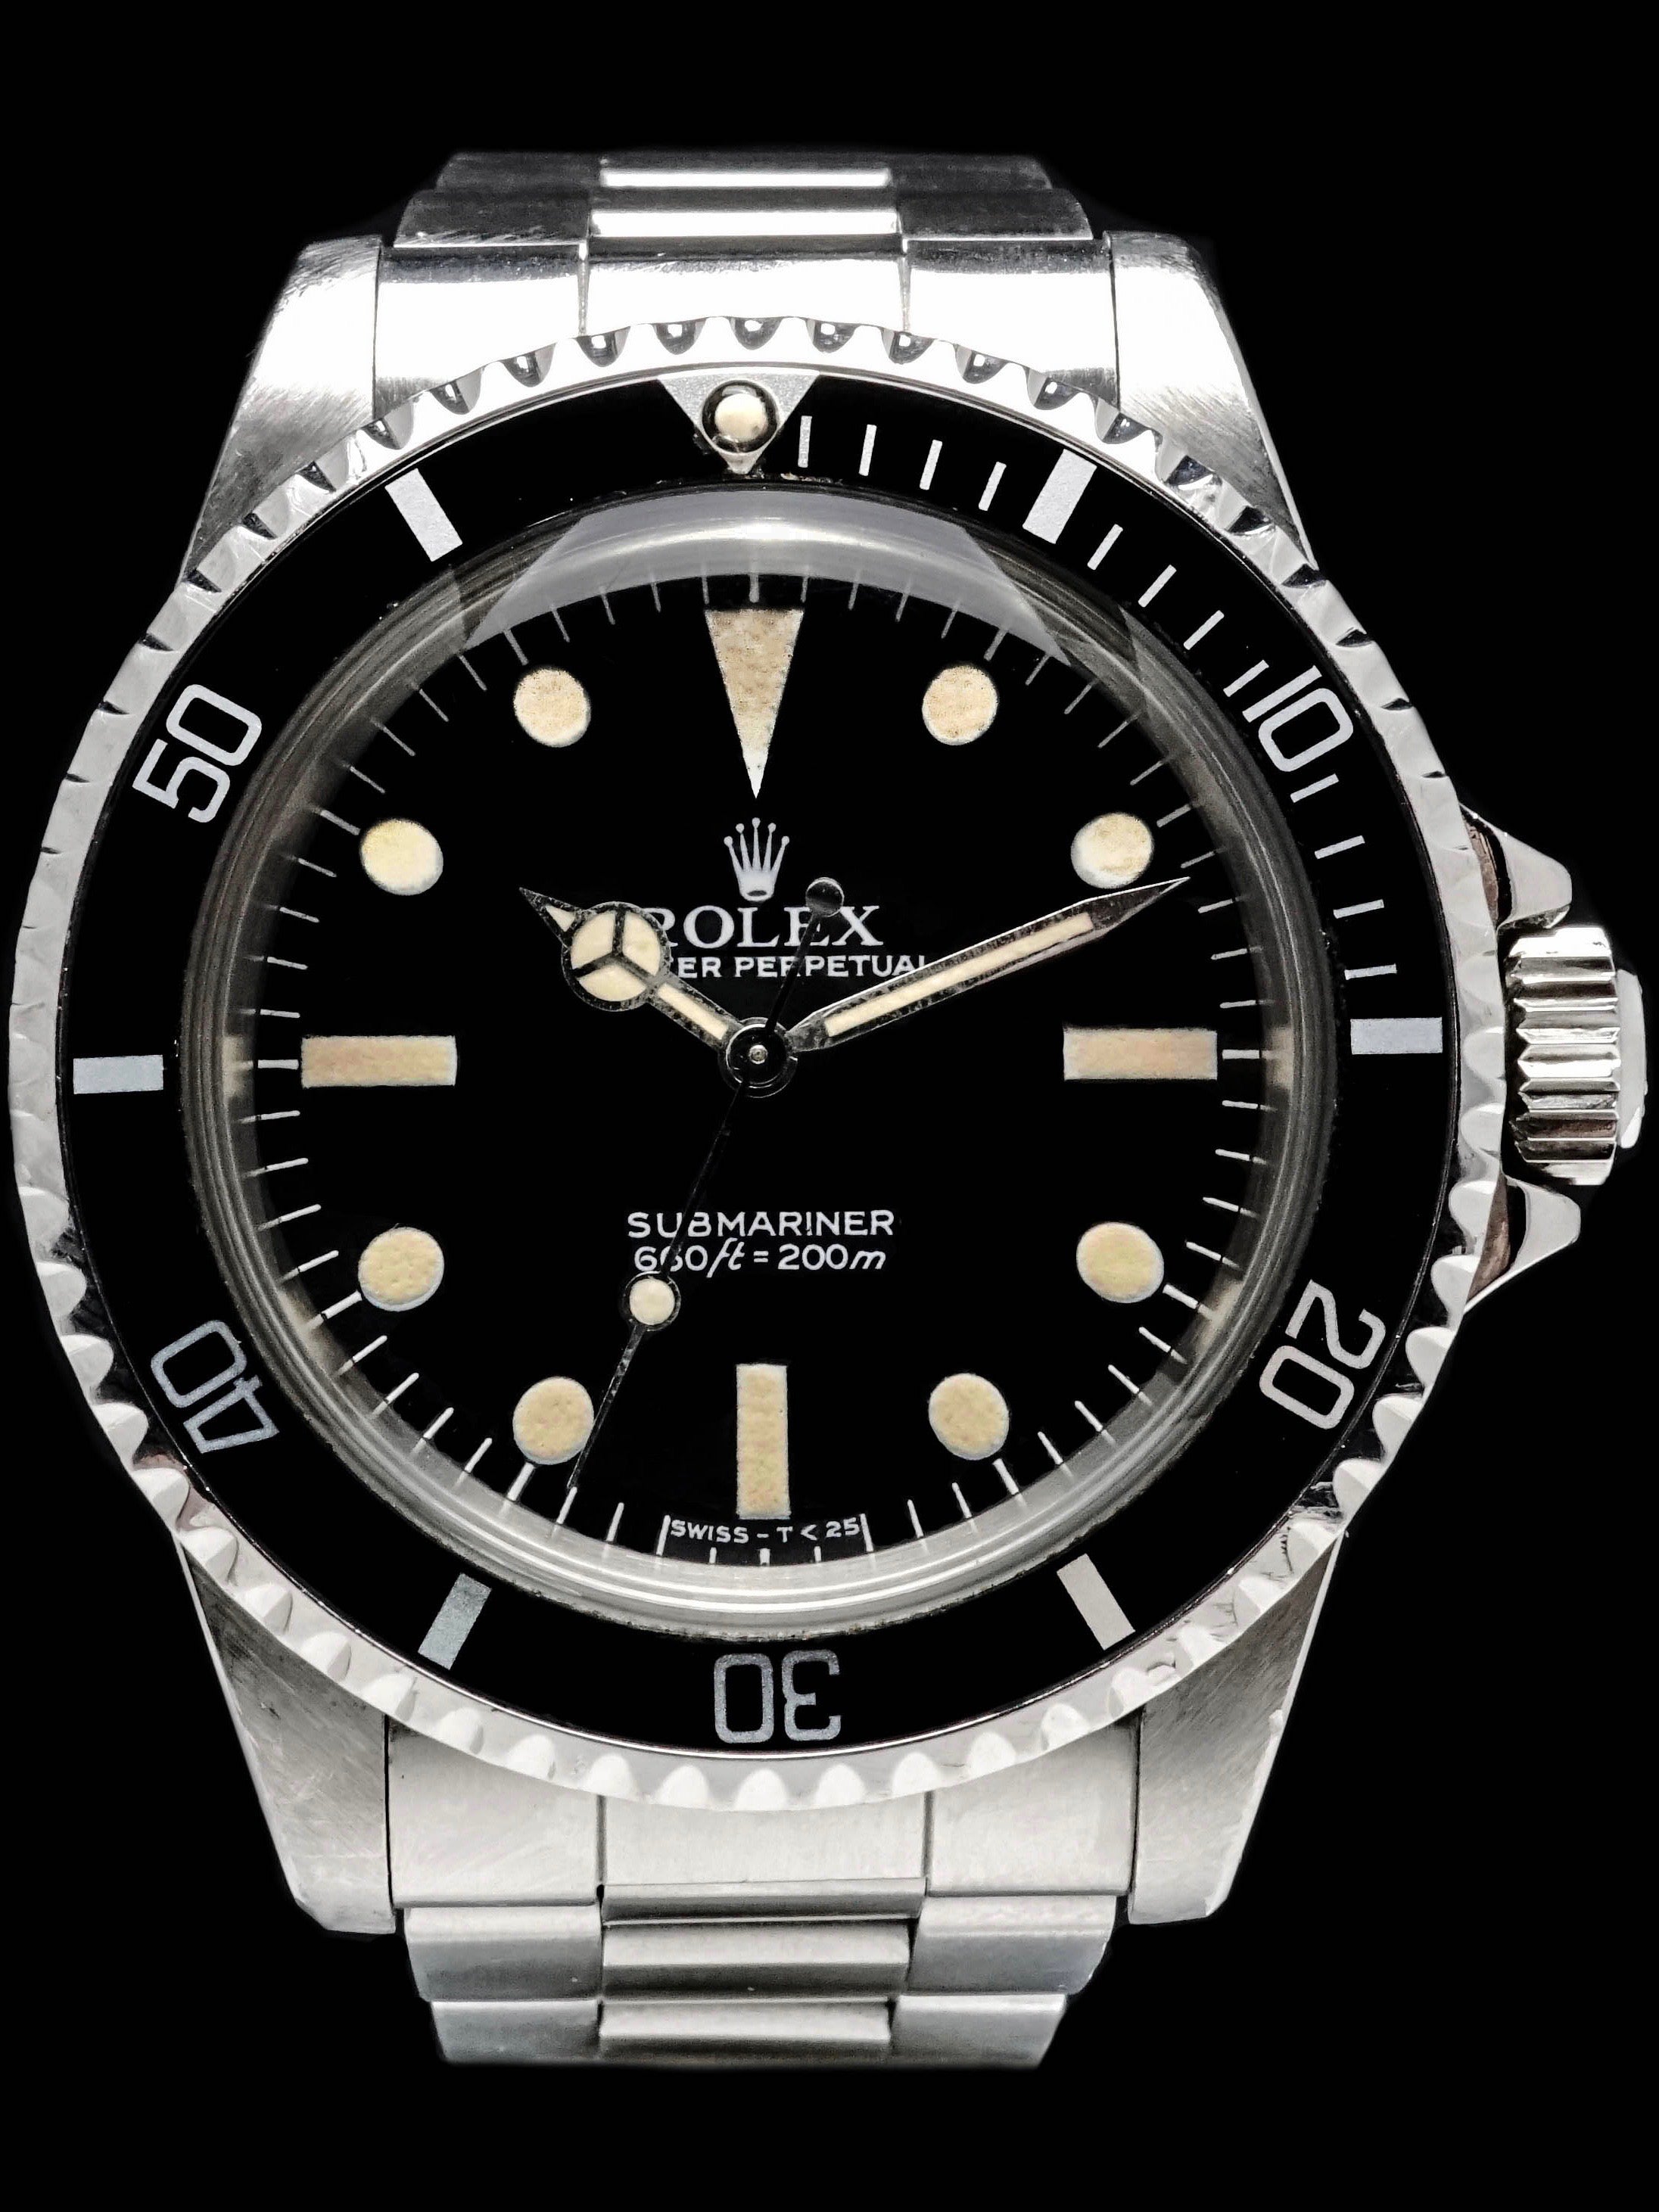 1982 Rolex Submariner (Ref. 5513) Mk. V Maxi Dial With Box, Papers, and RSC Papers